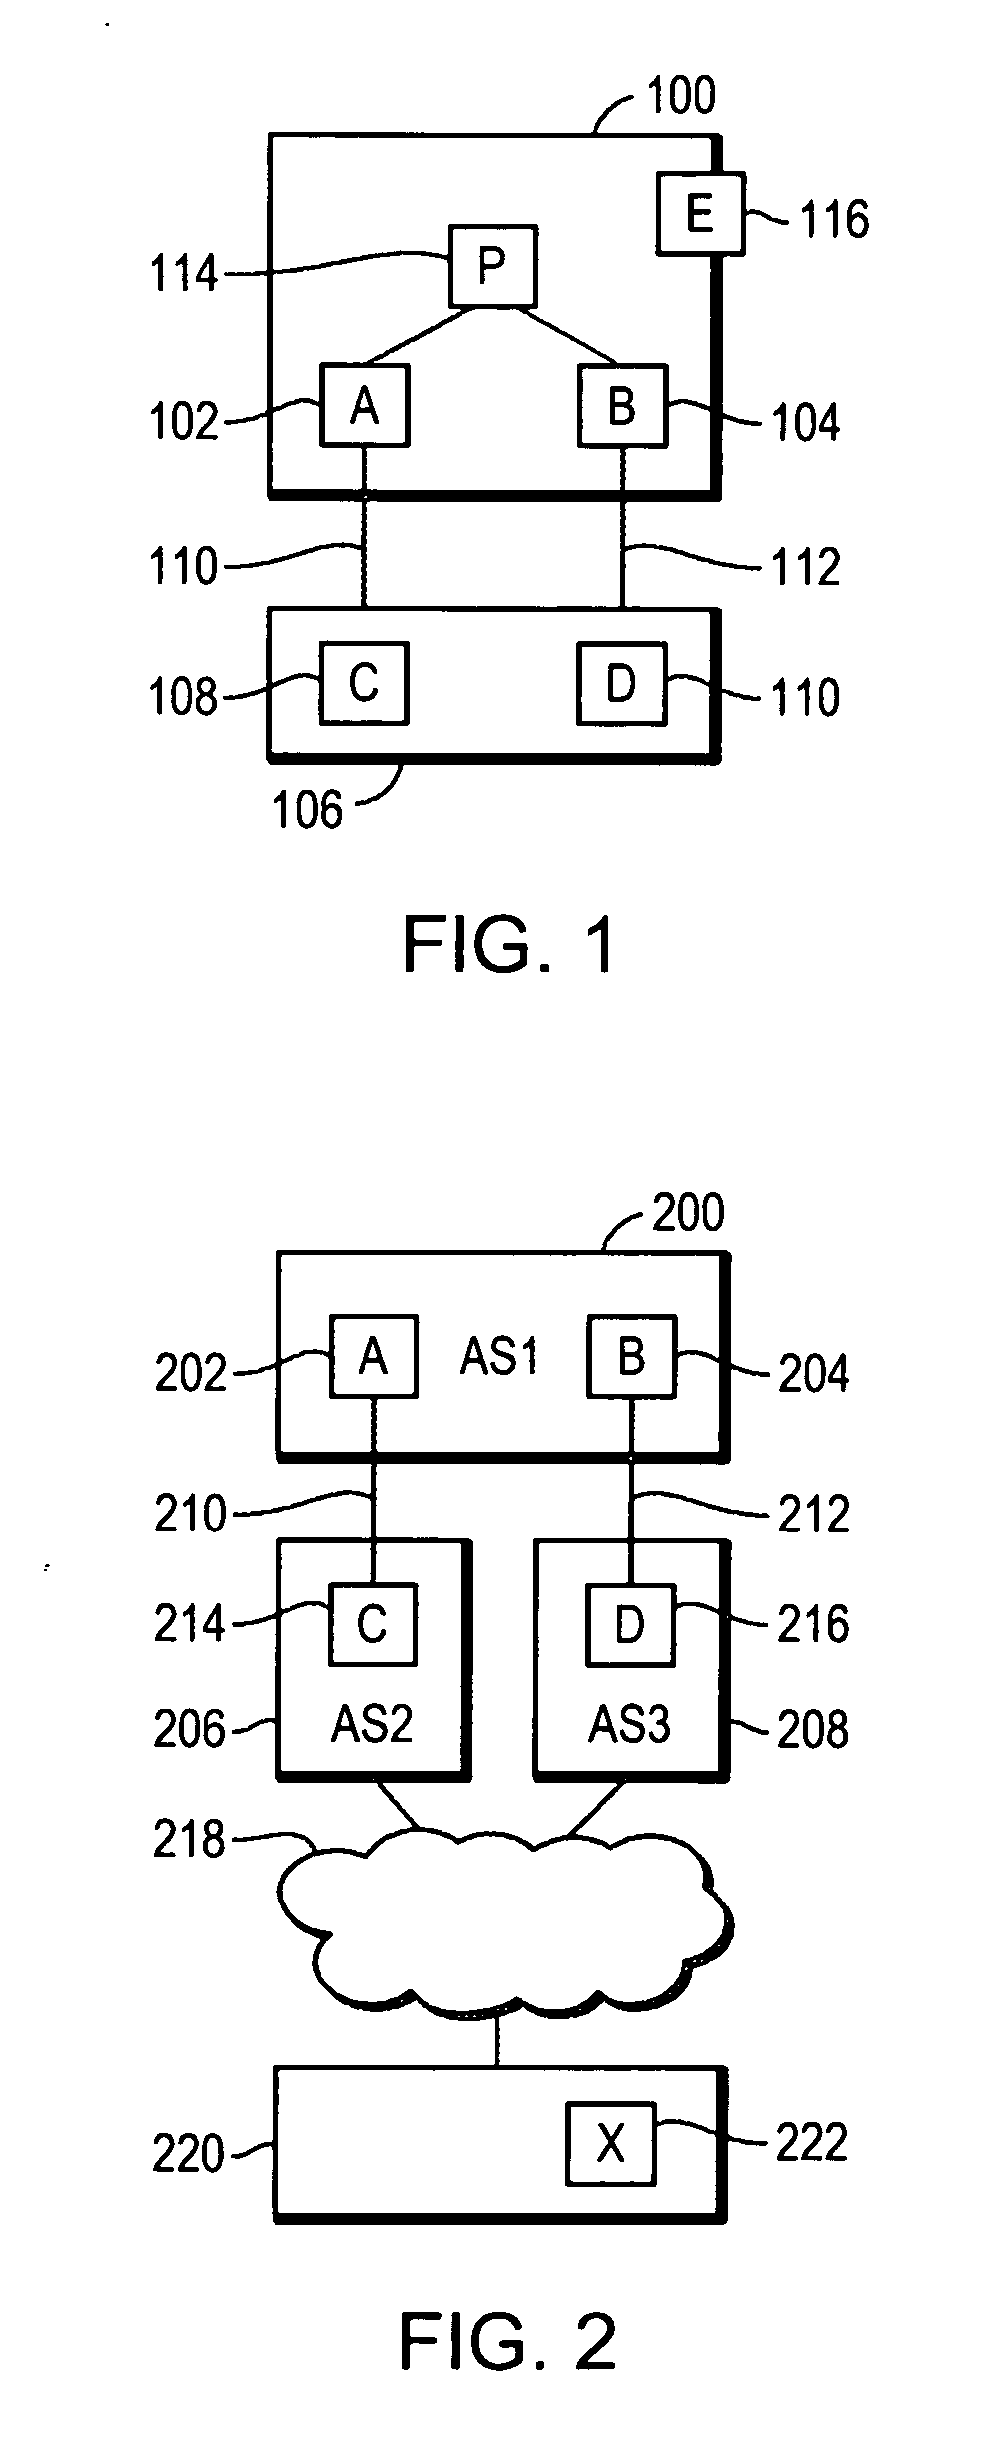 Method of implementing a backup path in an autonomous system